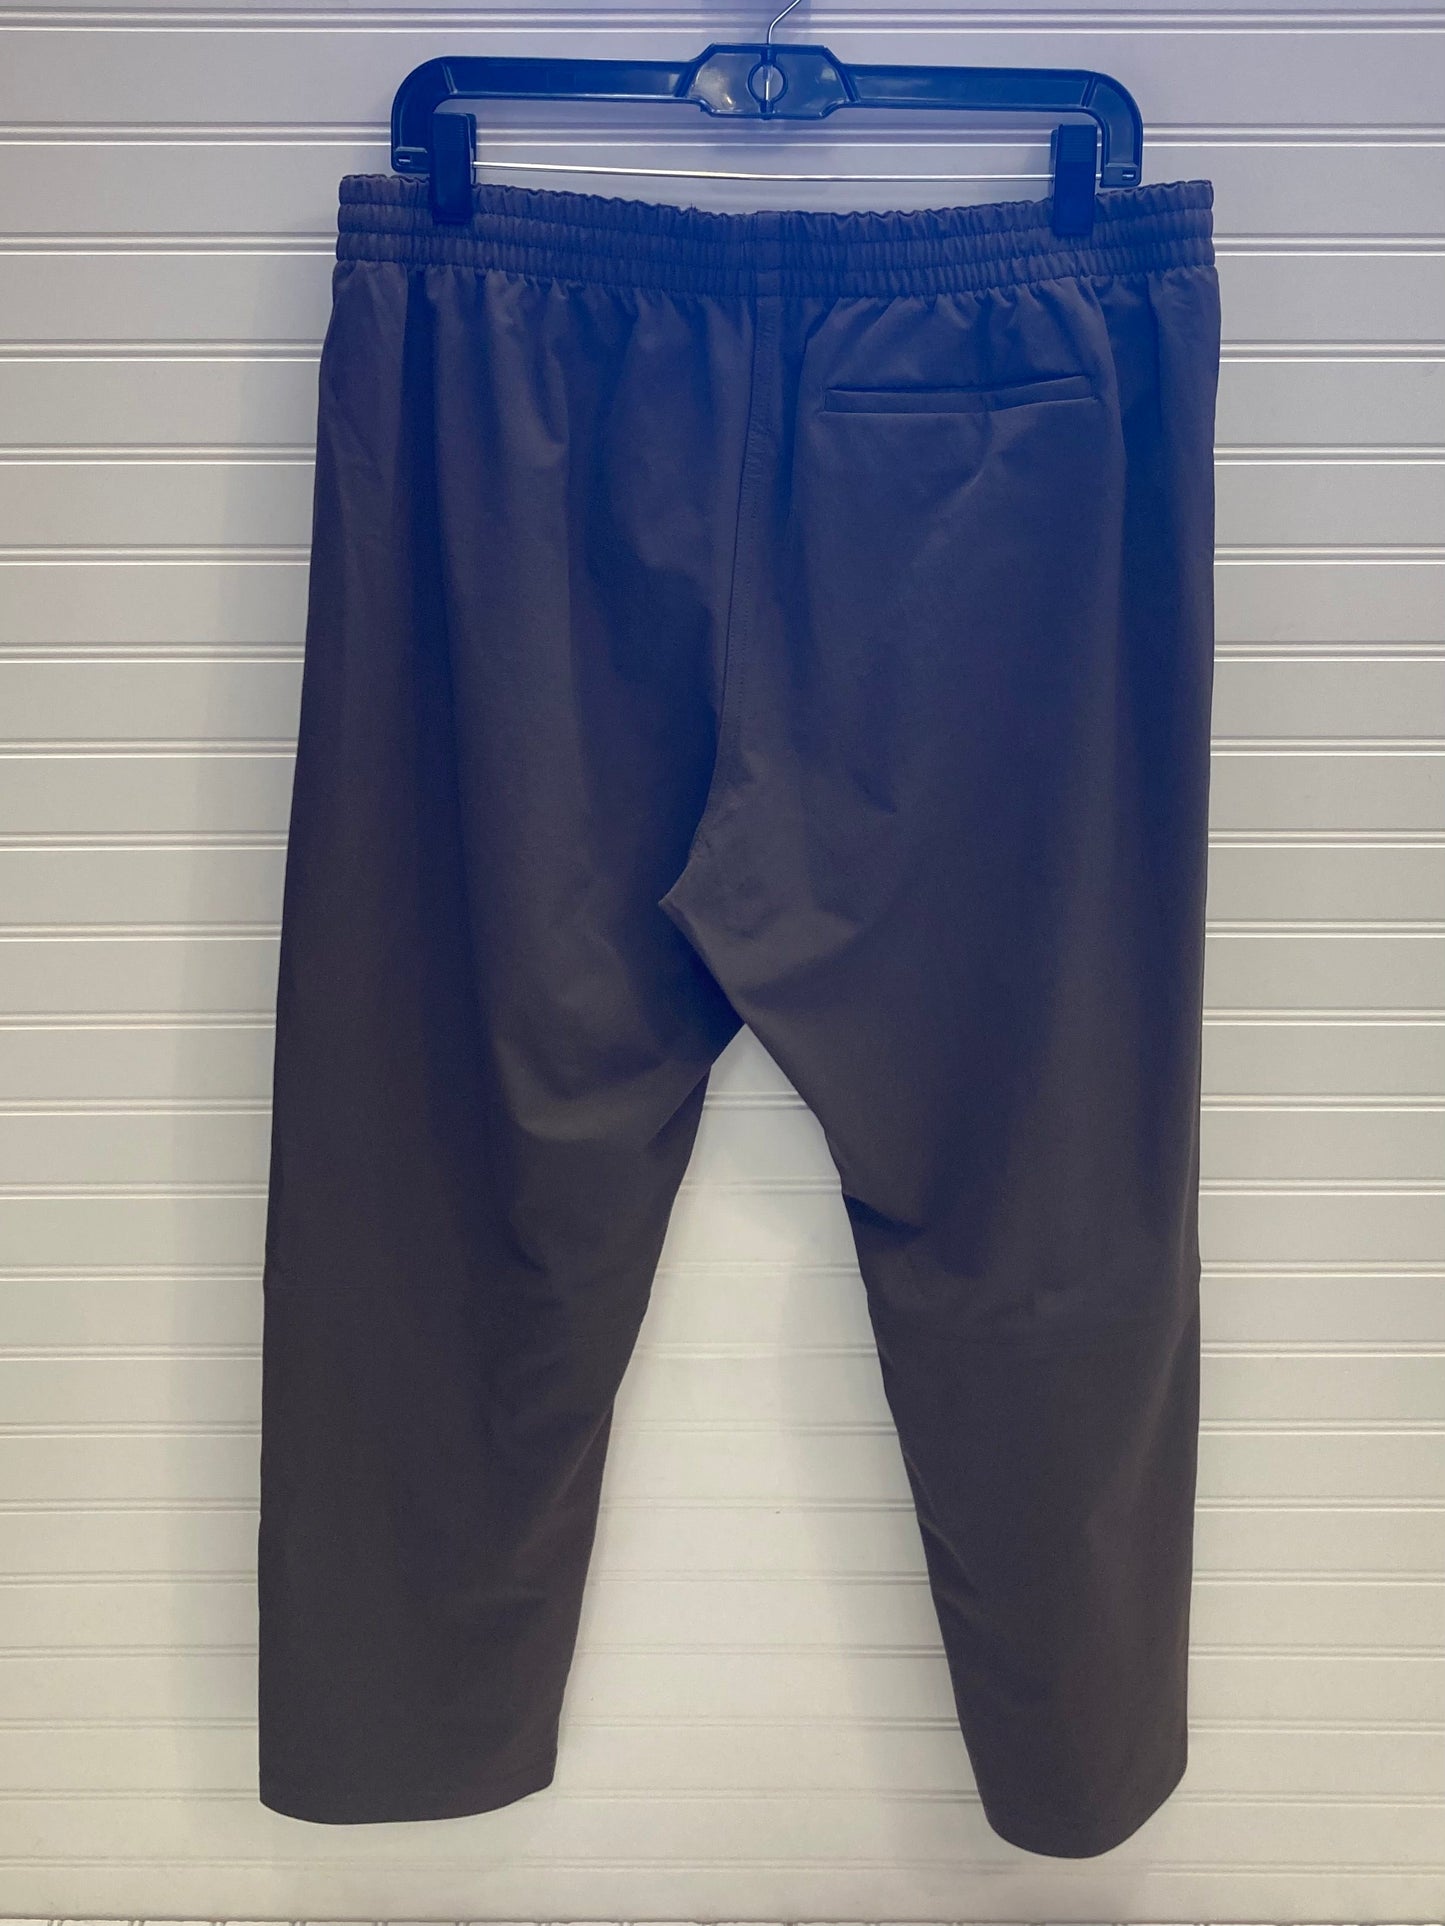 Brown Athletic Pants Outdoor Voices, Size Xl